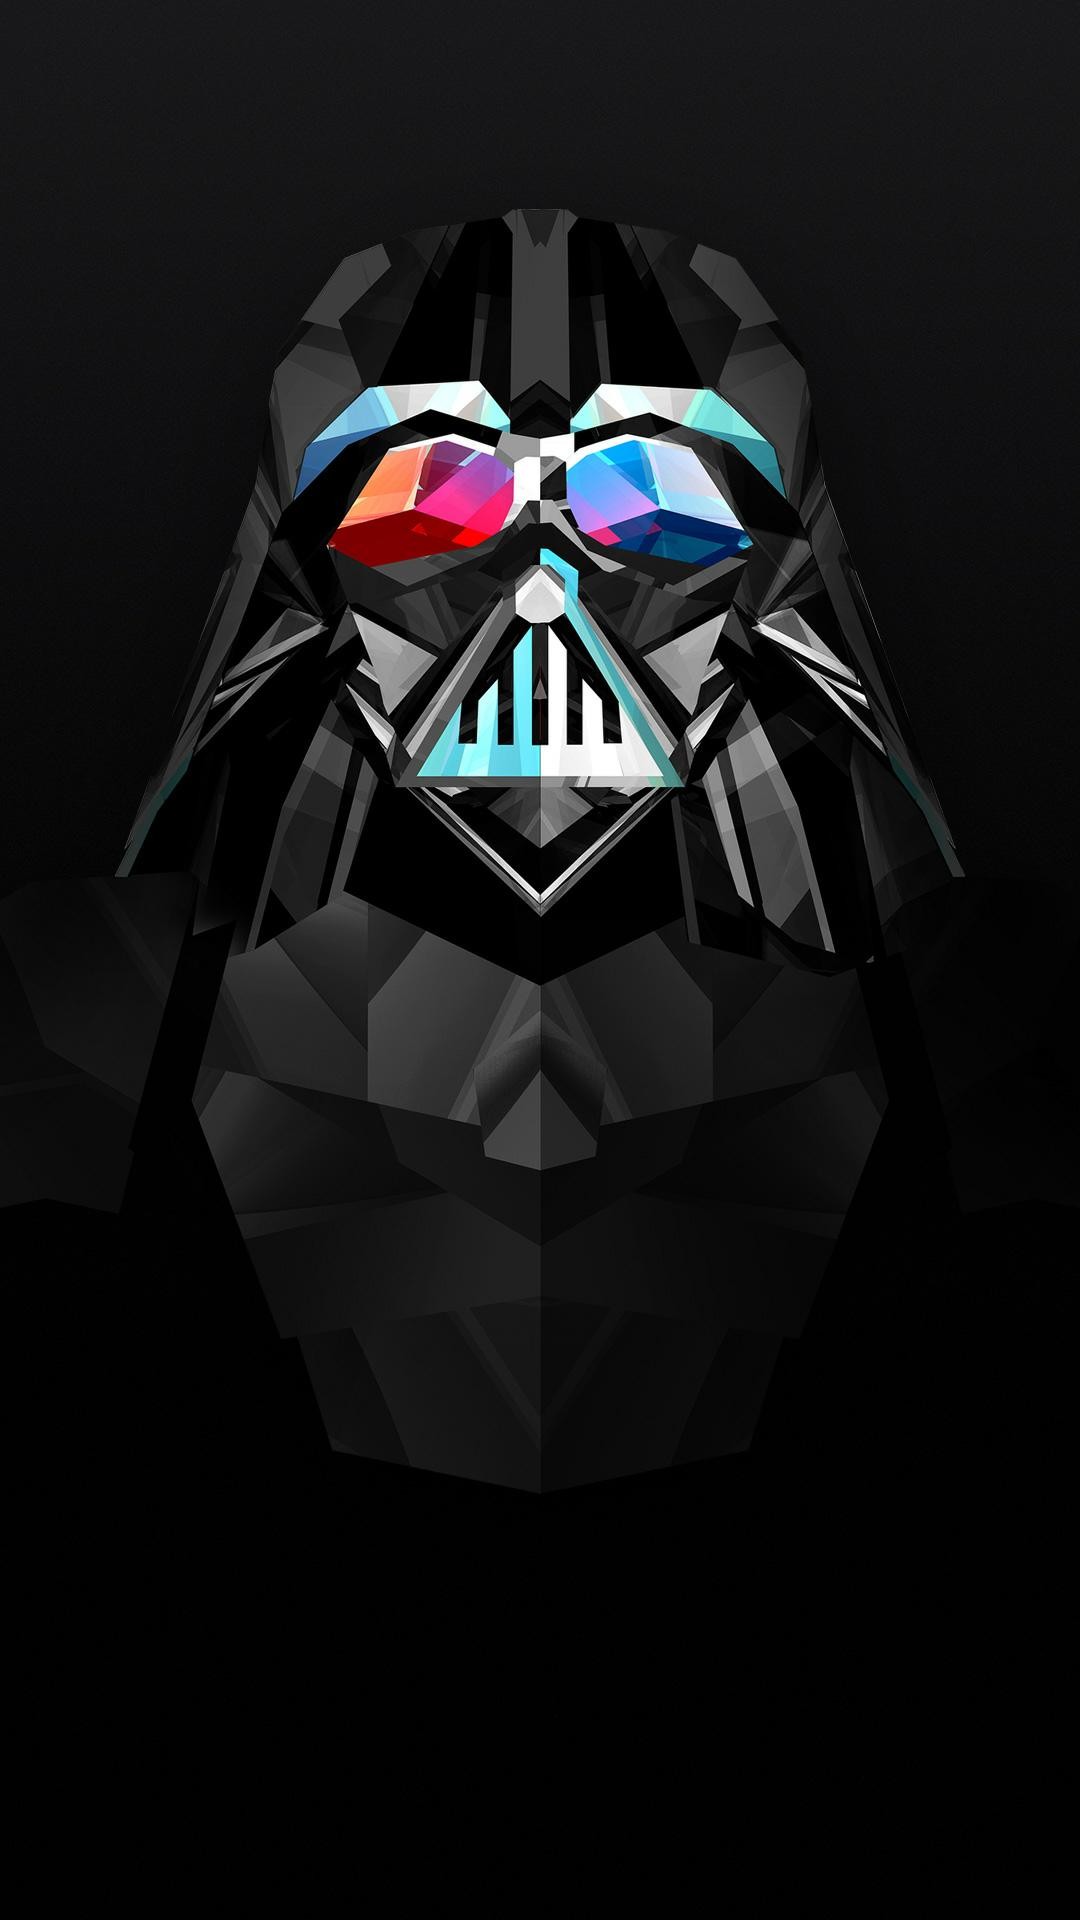 1080x1920 Some Nice *** Wallpapers - OnePlus Forums